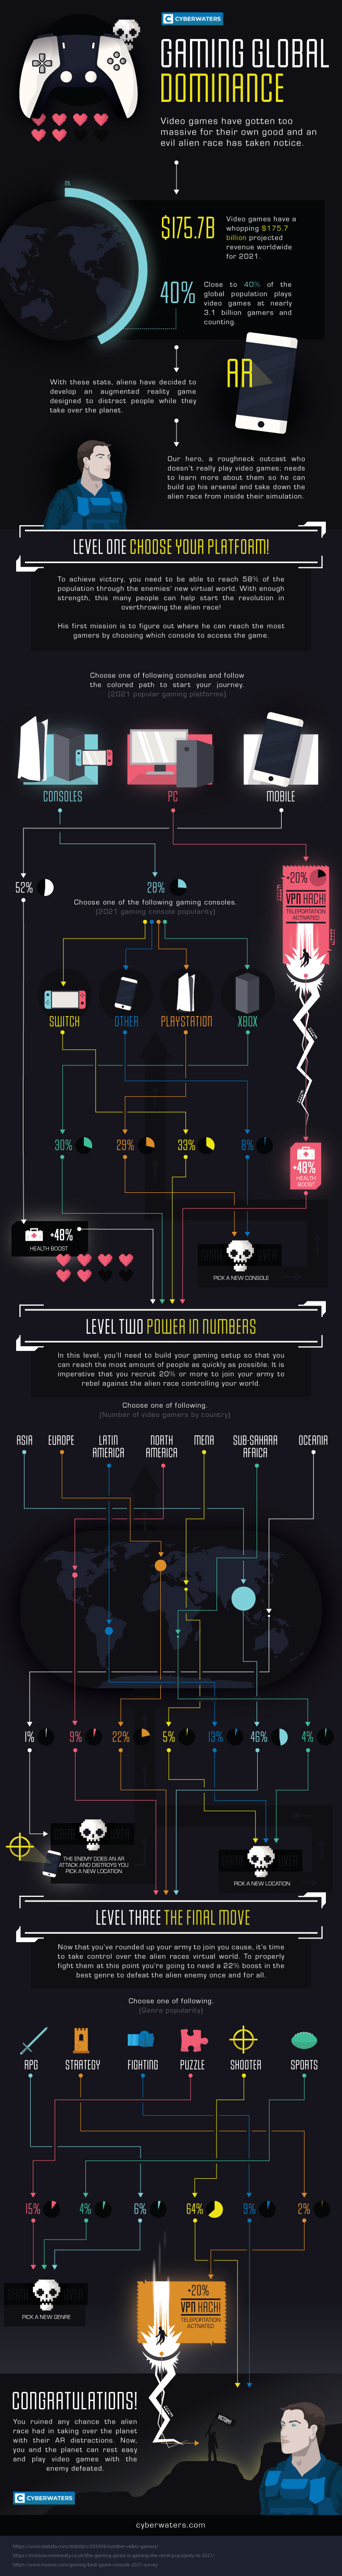 Gaming Statistics Infographic with gaming data